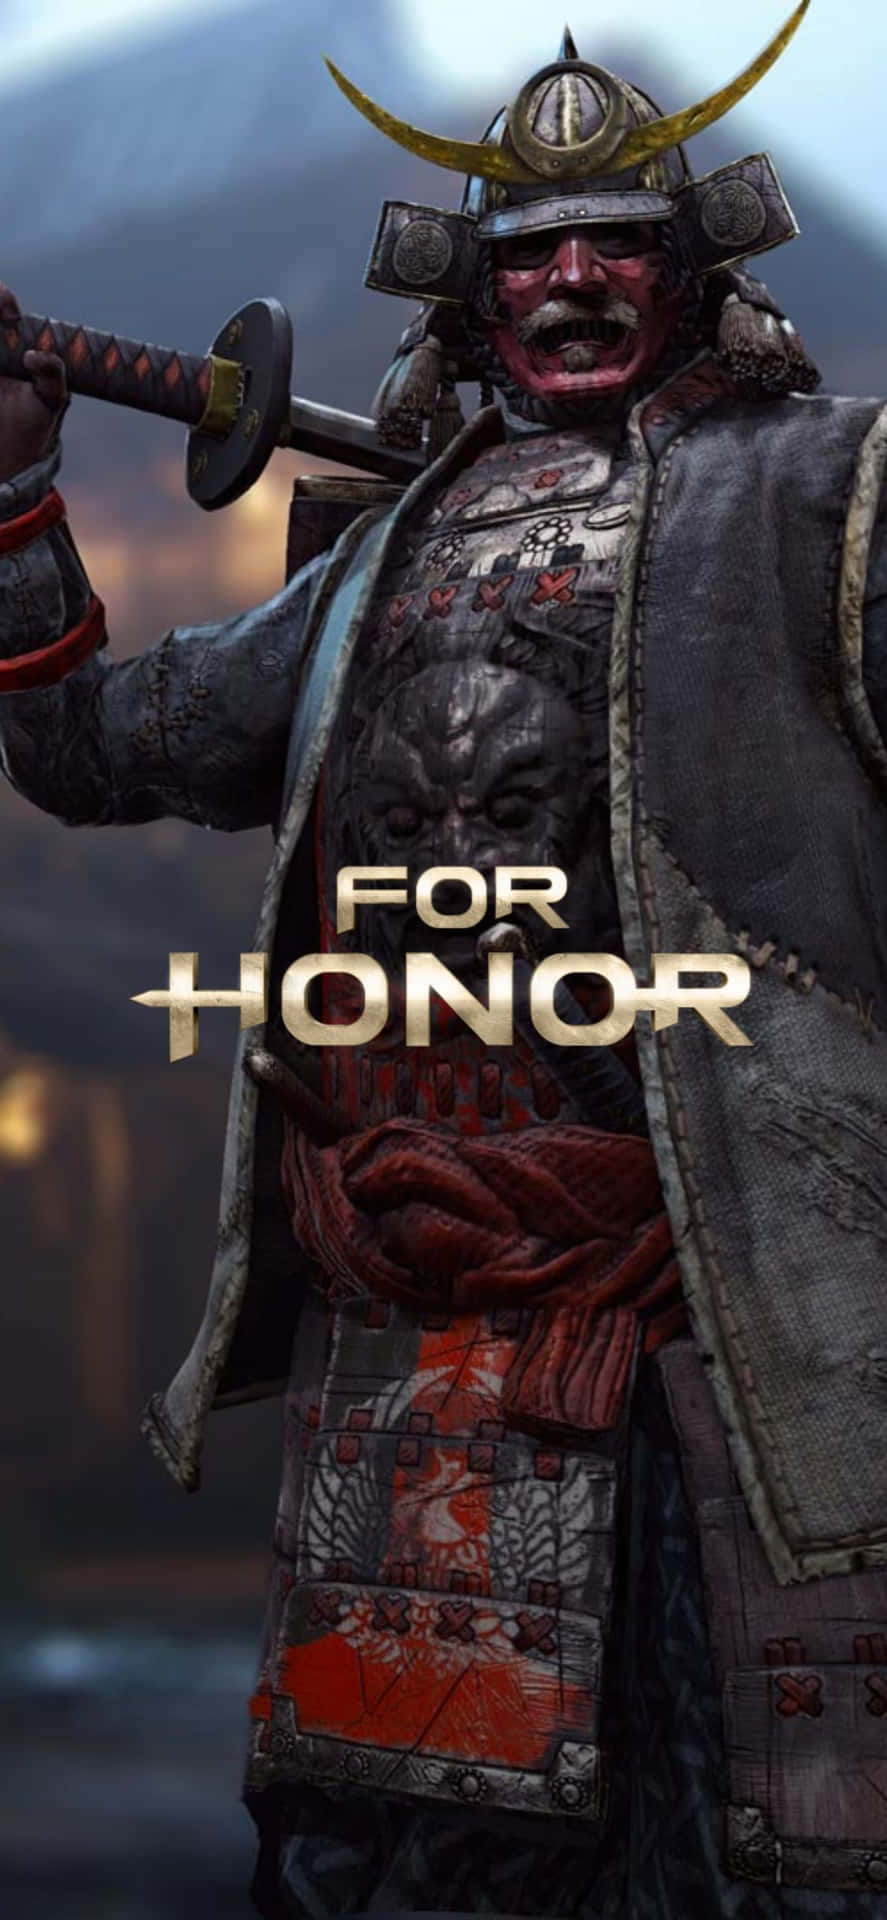 For Honor x Iphone Xs - Take your gaming to the next level